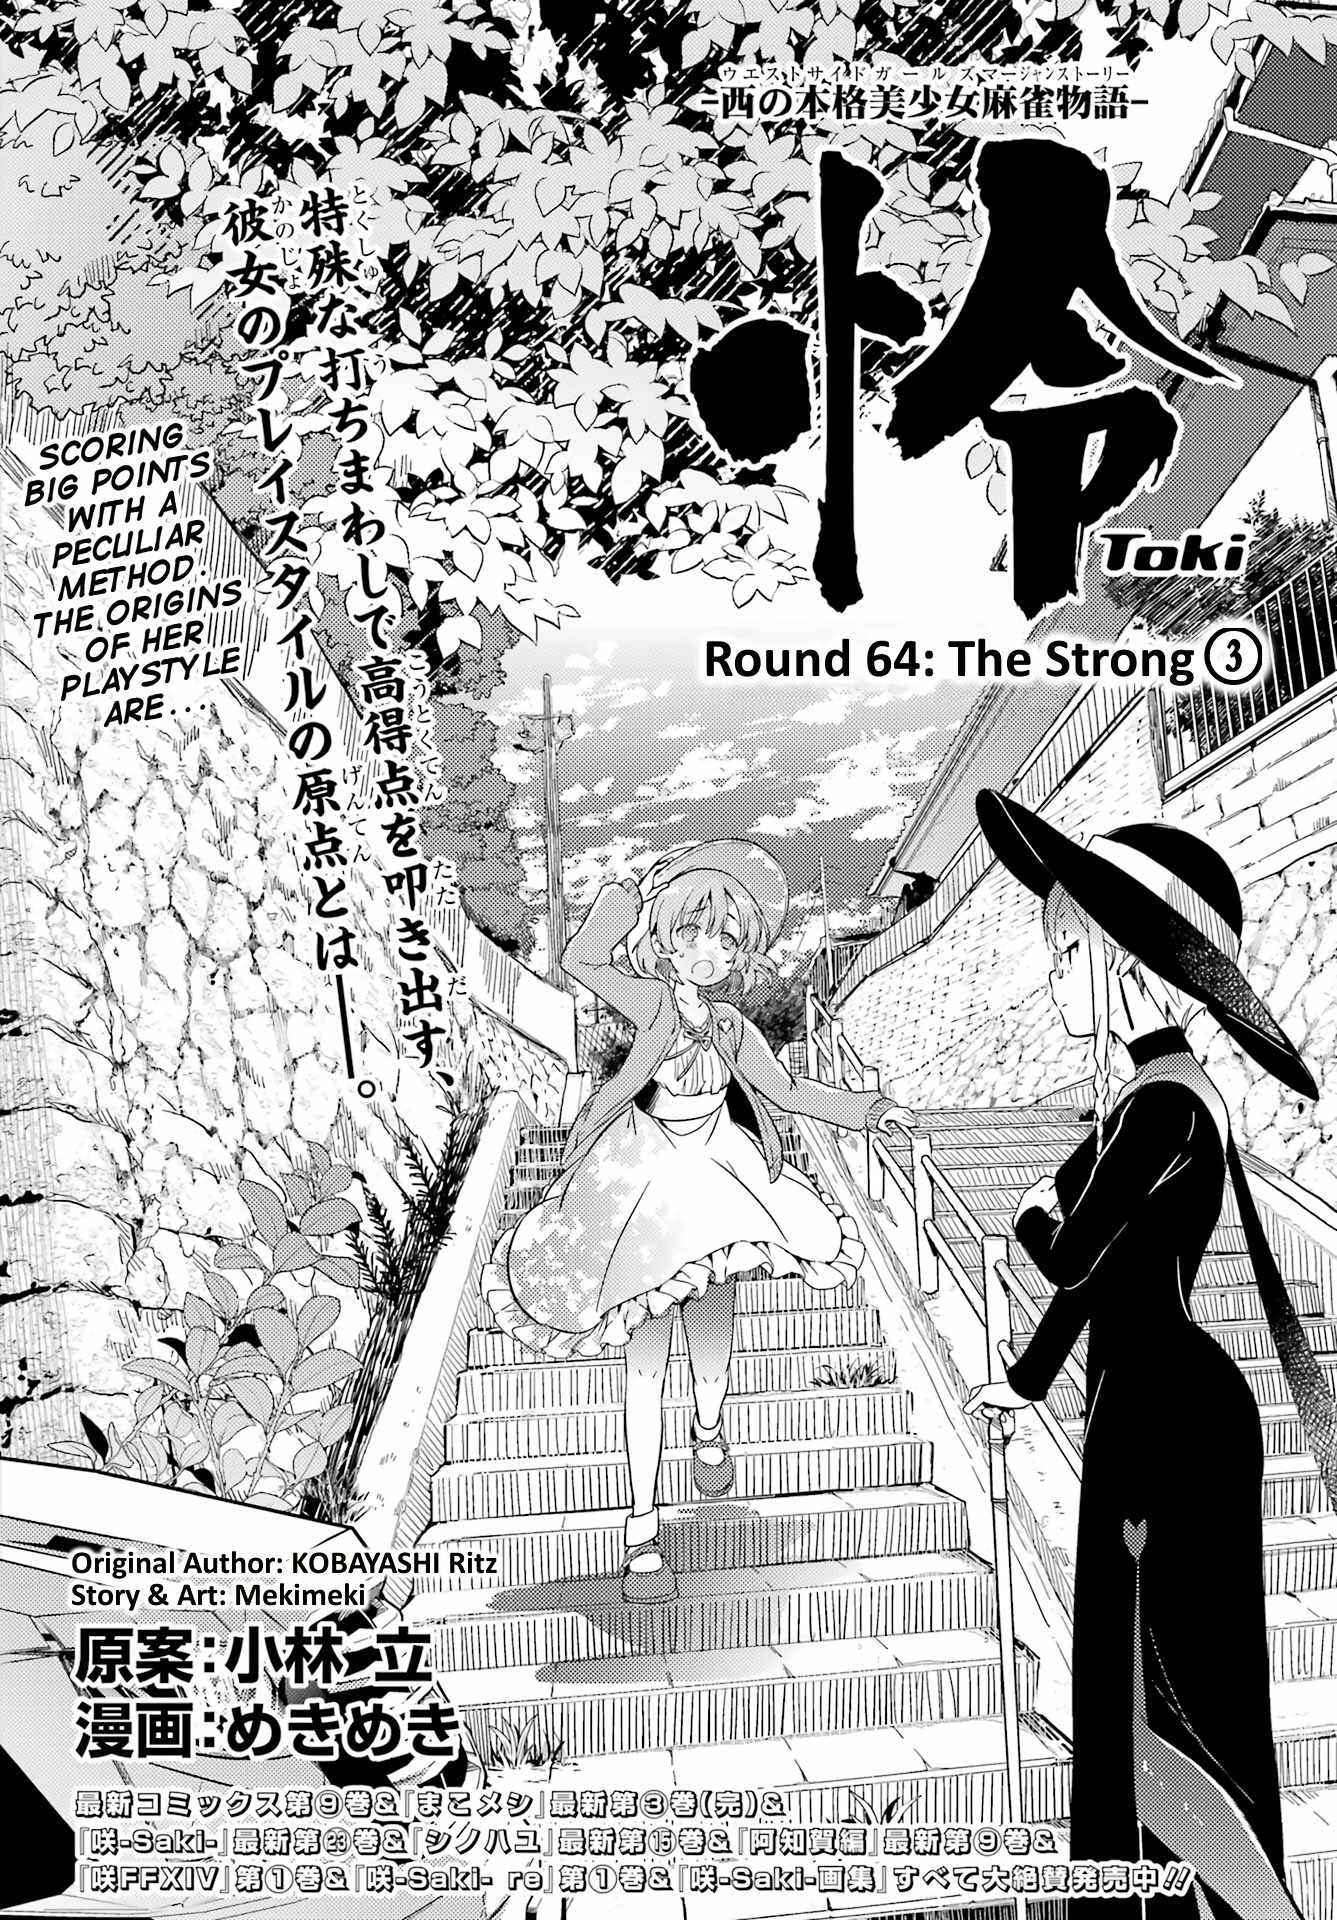 Toki Chapter 64: The Strong 3 - Picture 2